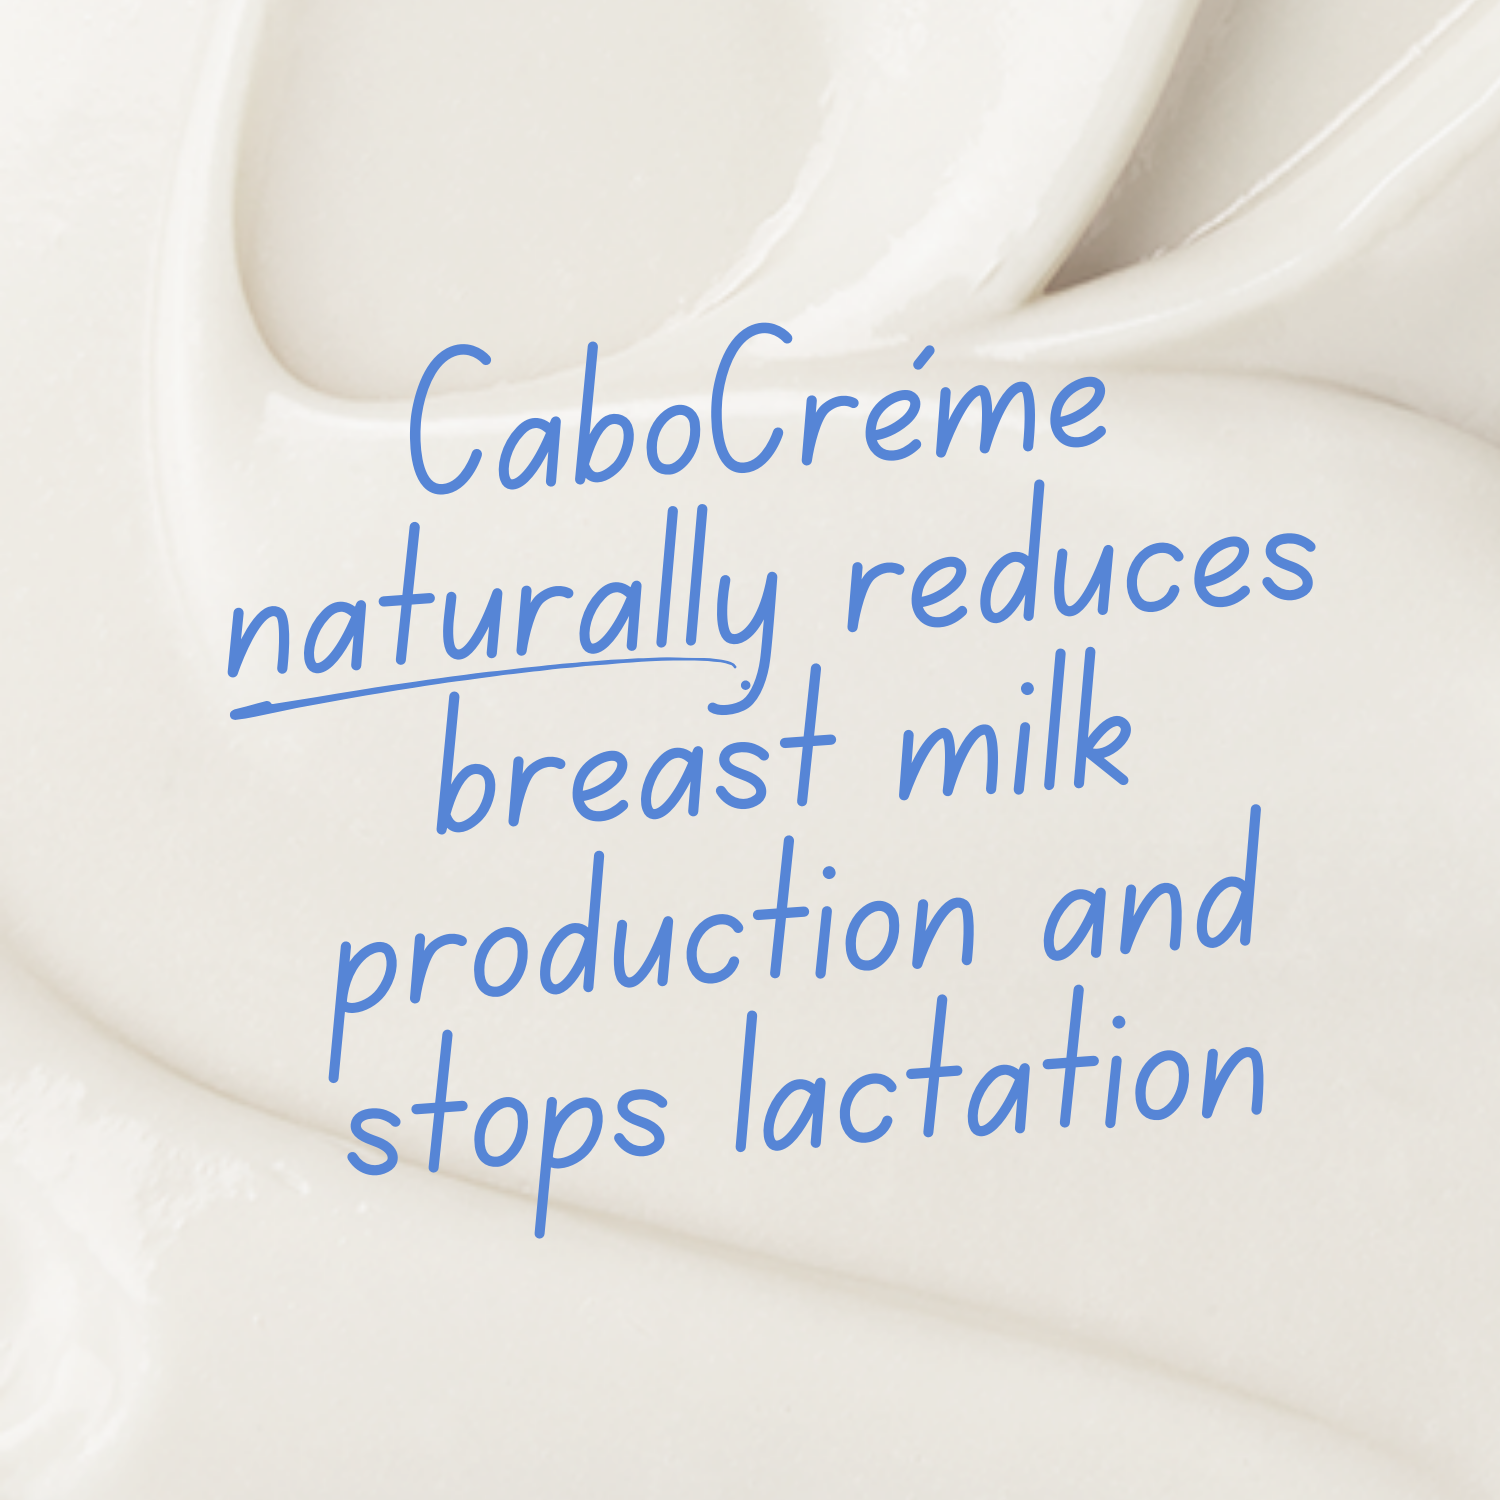 Cabo Creme for reduces breast milk production